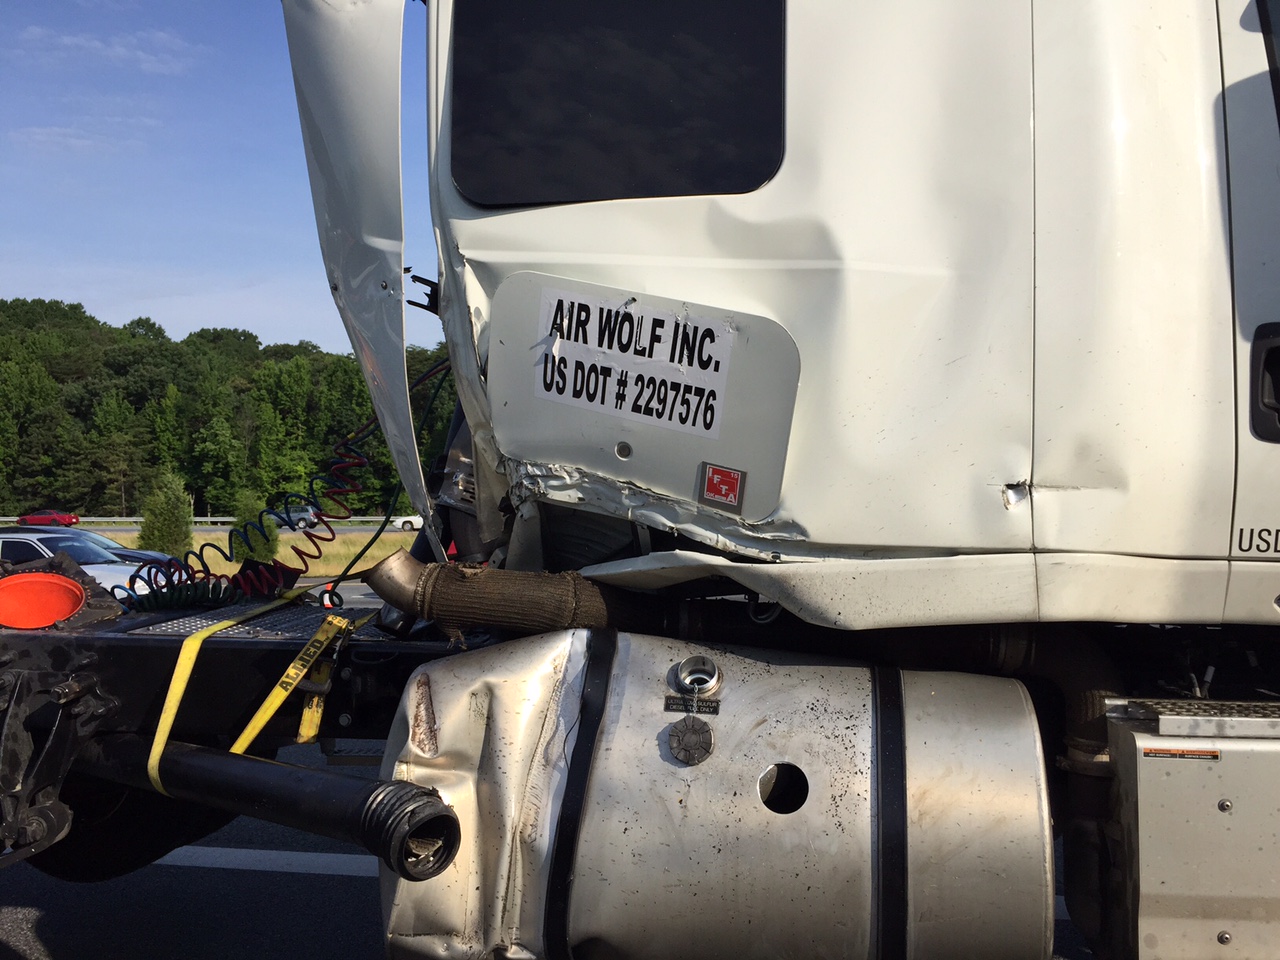 The cab of the truck involved in the fatal crash on I-95 in Beltsville. (WTOP/Kristi King)